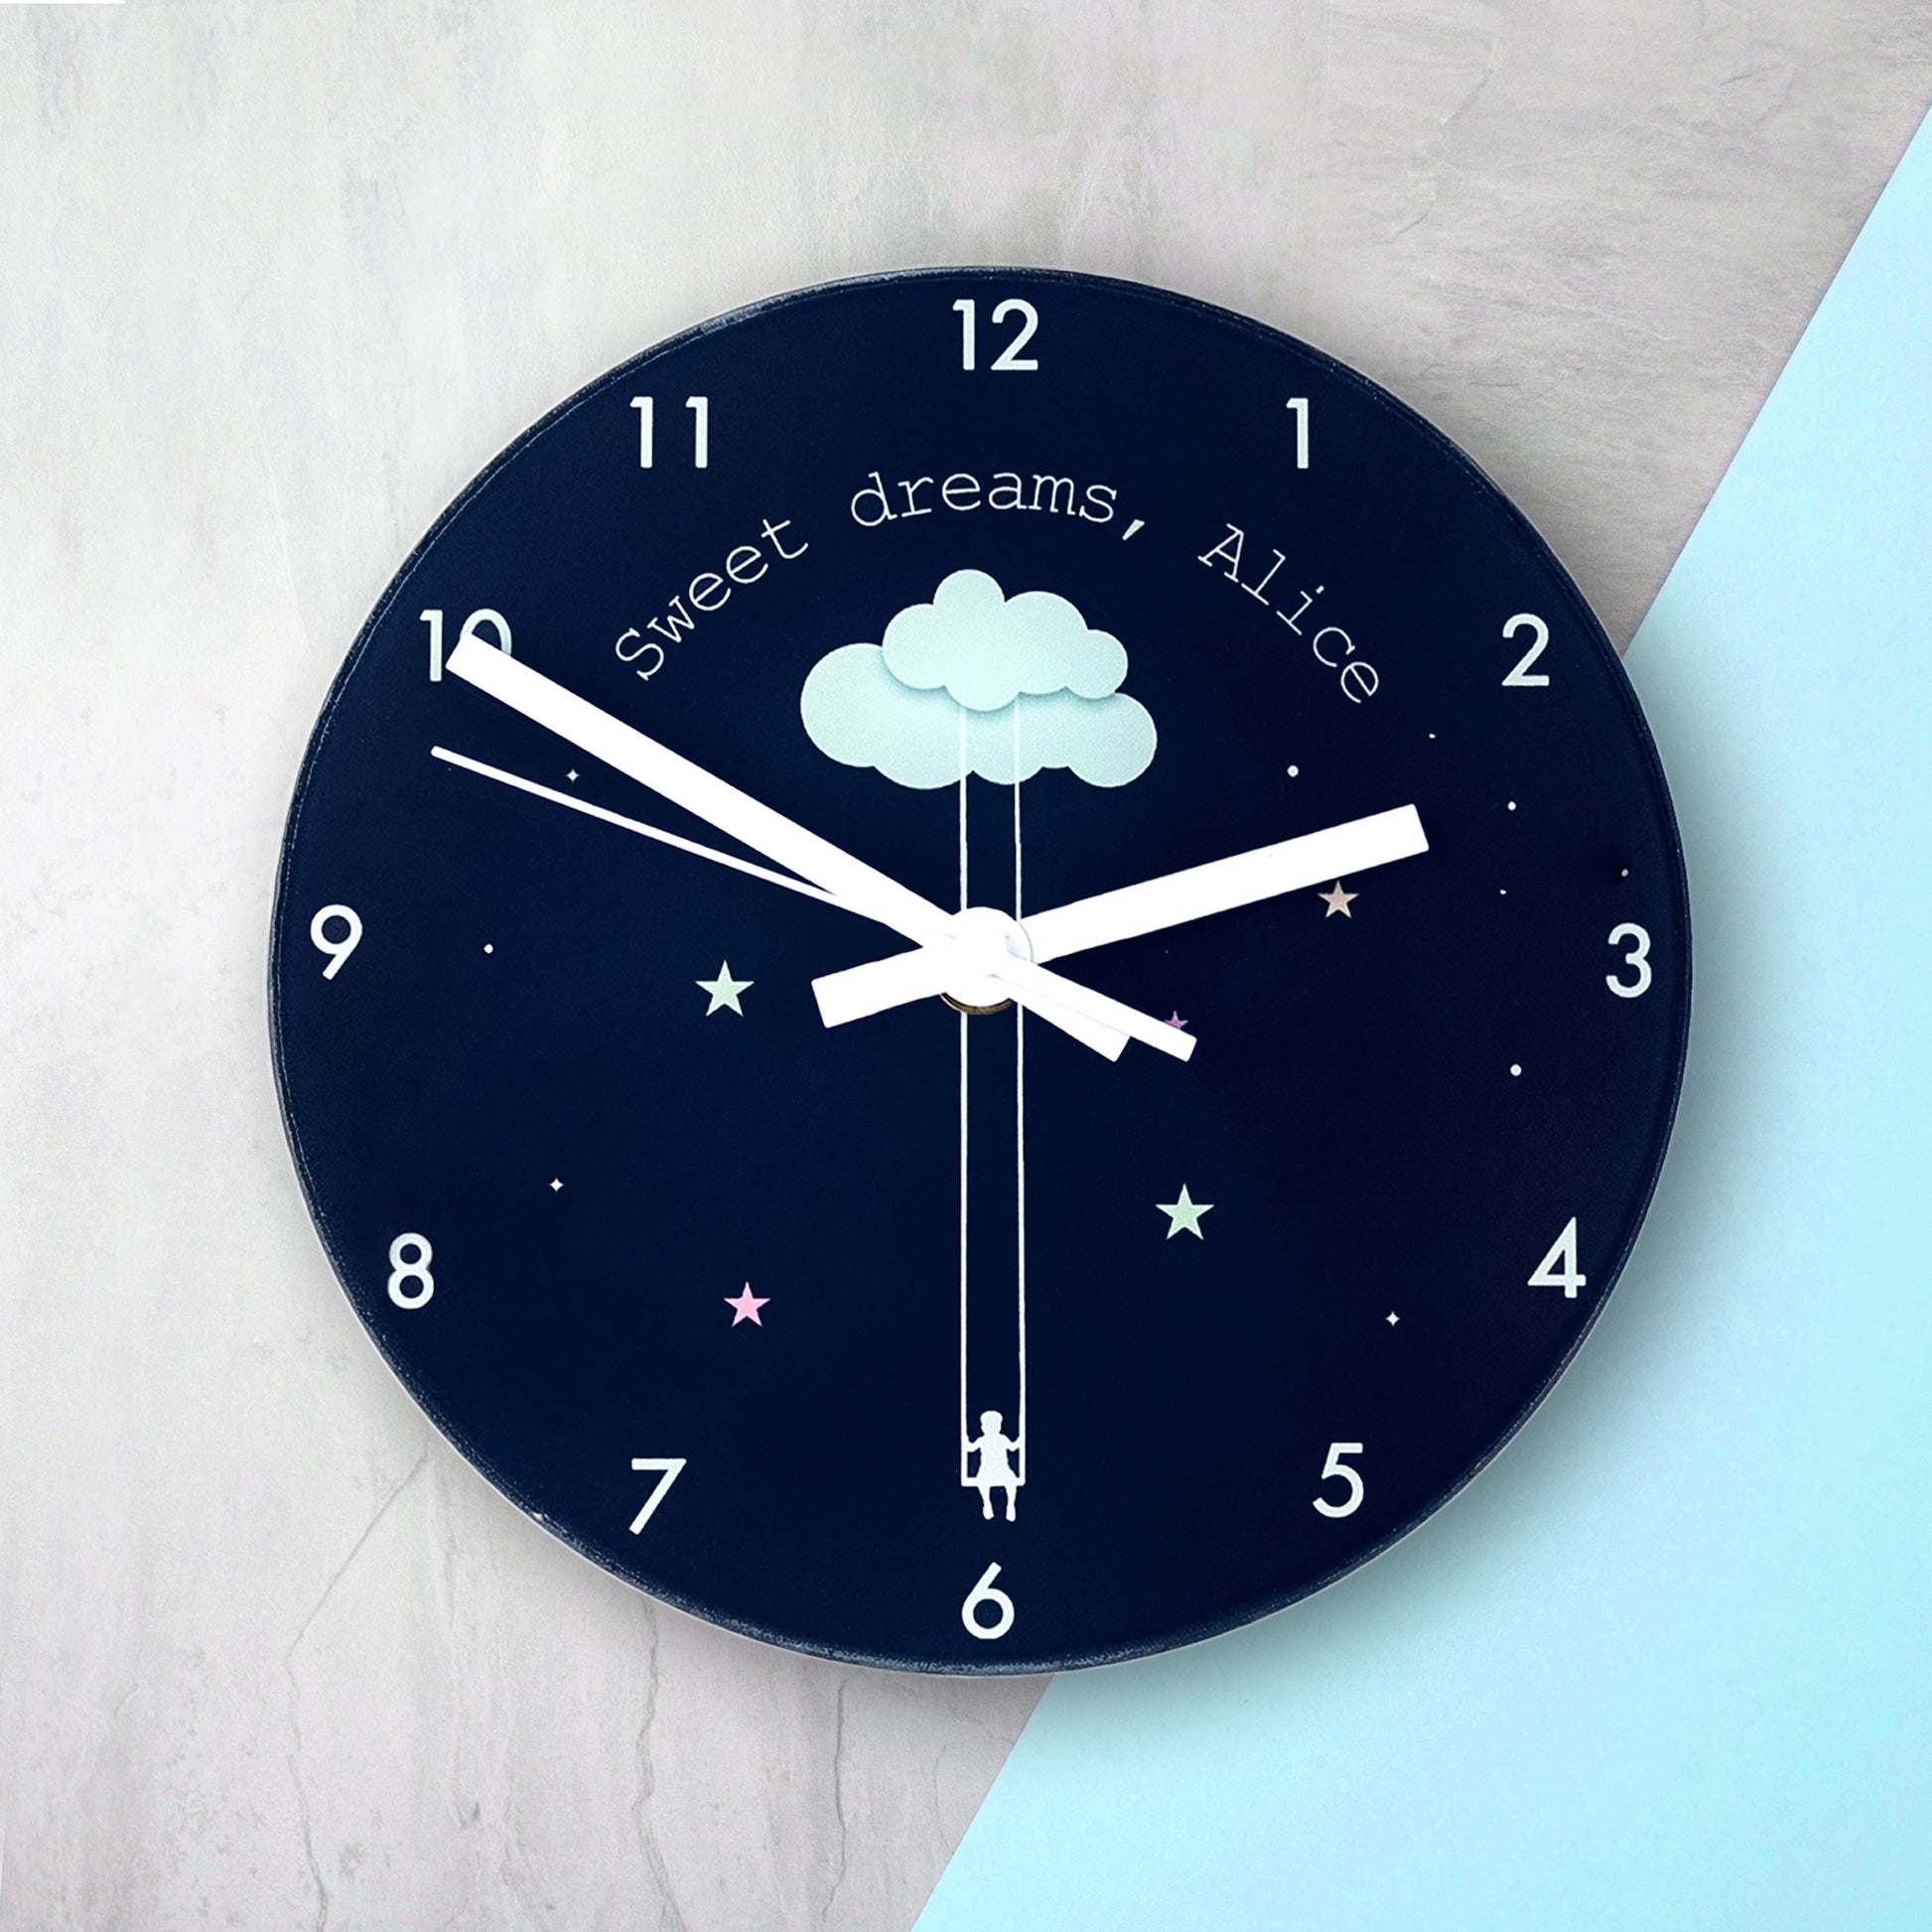 Personalized Clocks - Personalized Sweet Dreams Wall Clock 